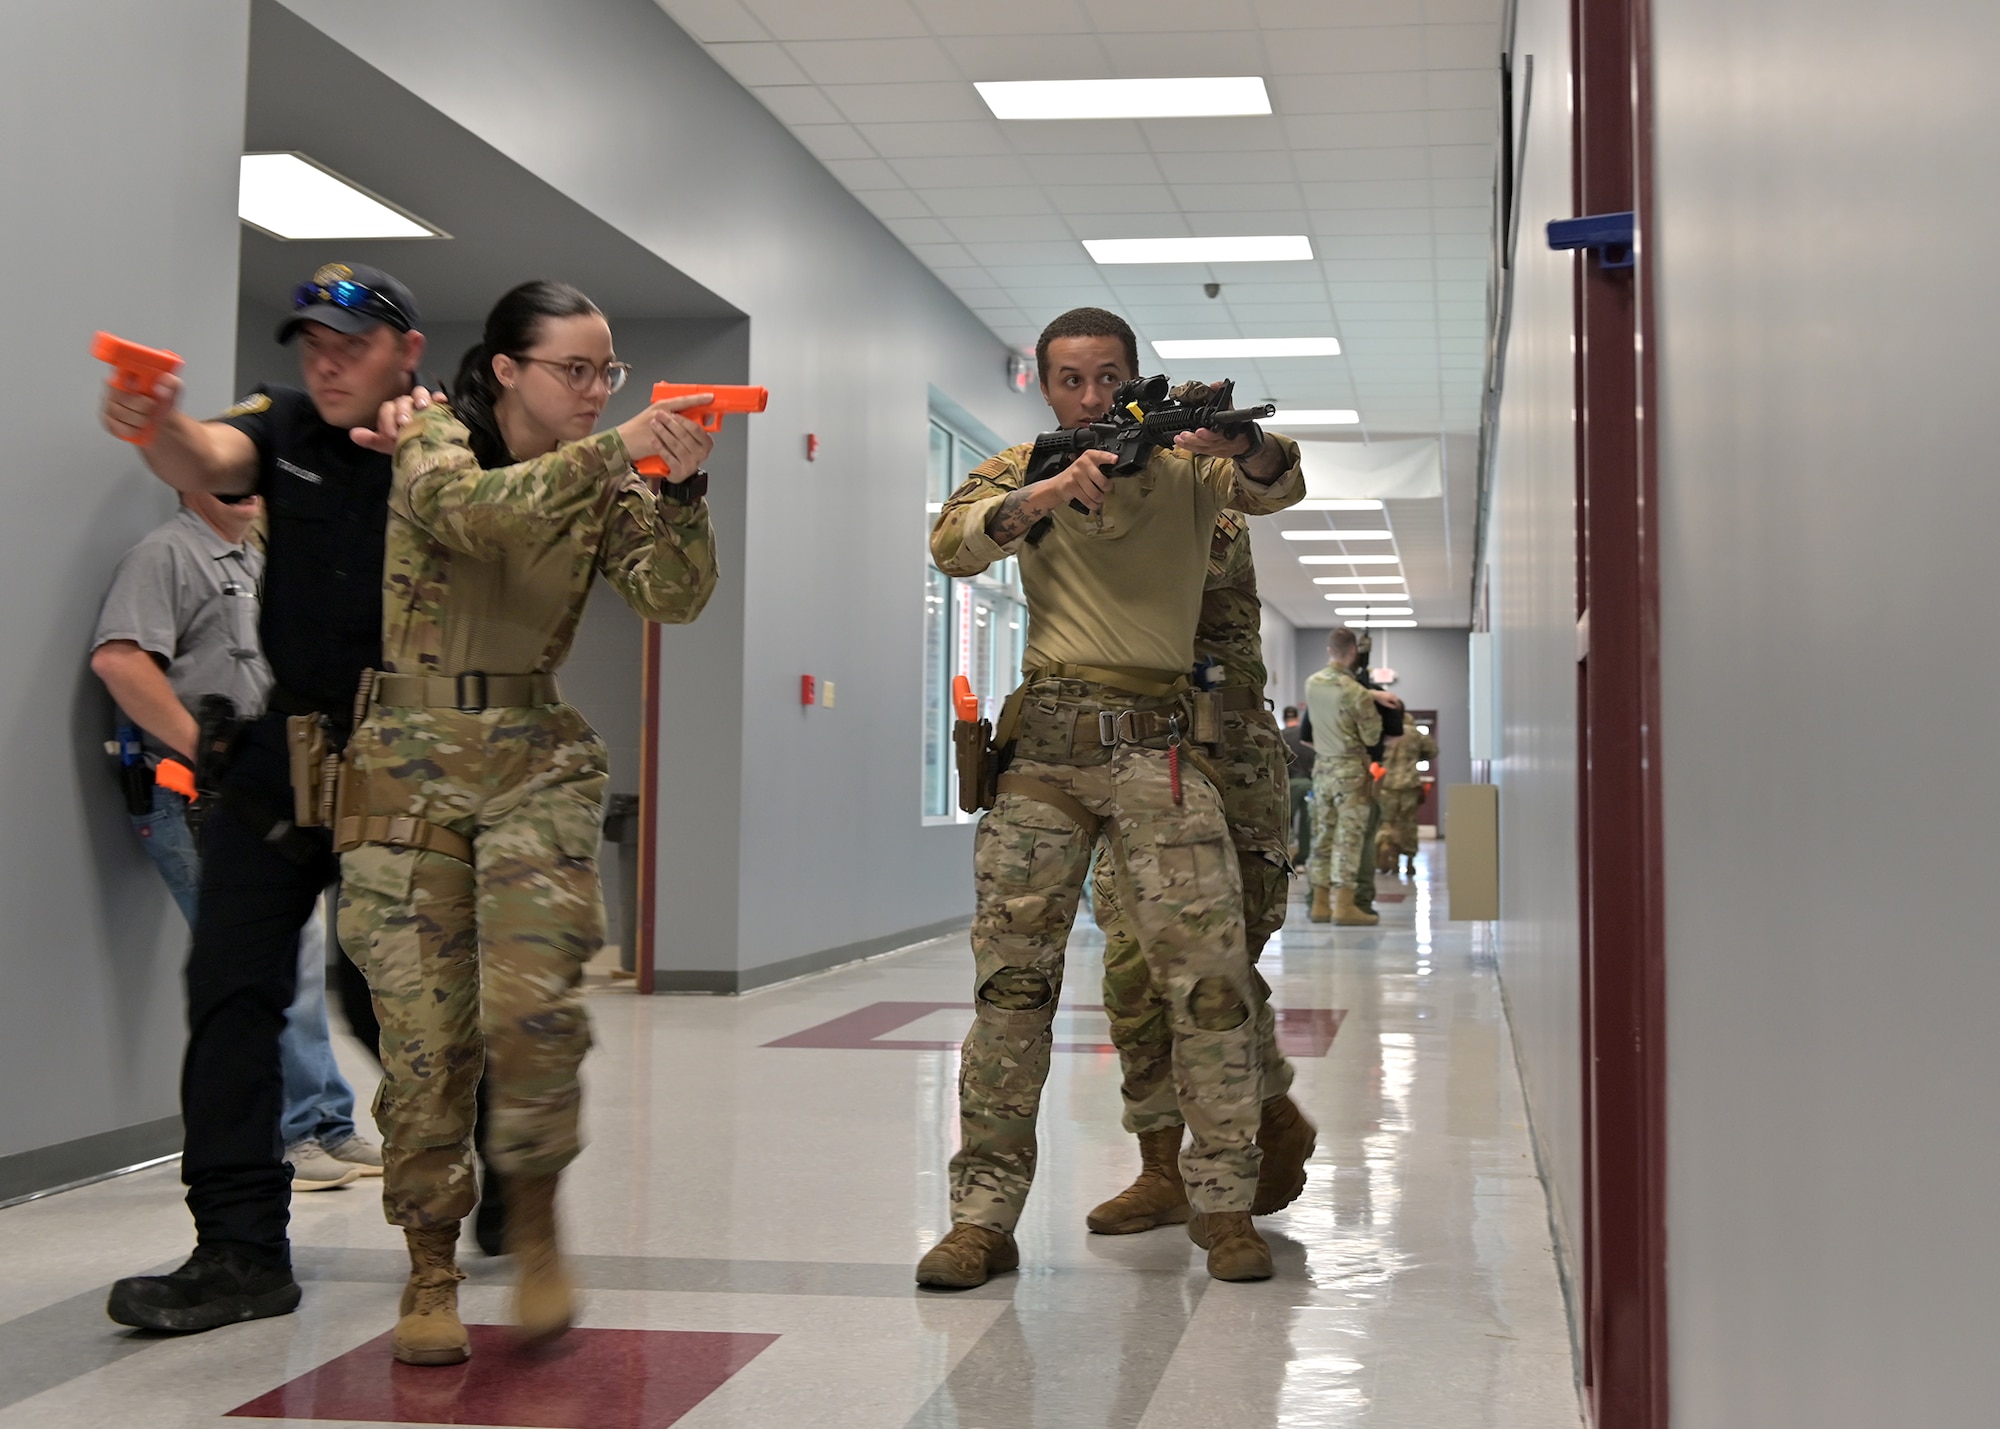 ALERRT participants initiate contact with a simulated active shooter.